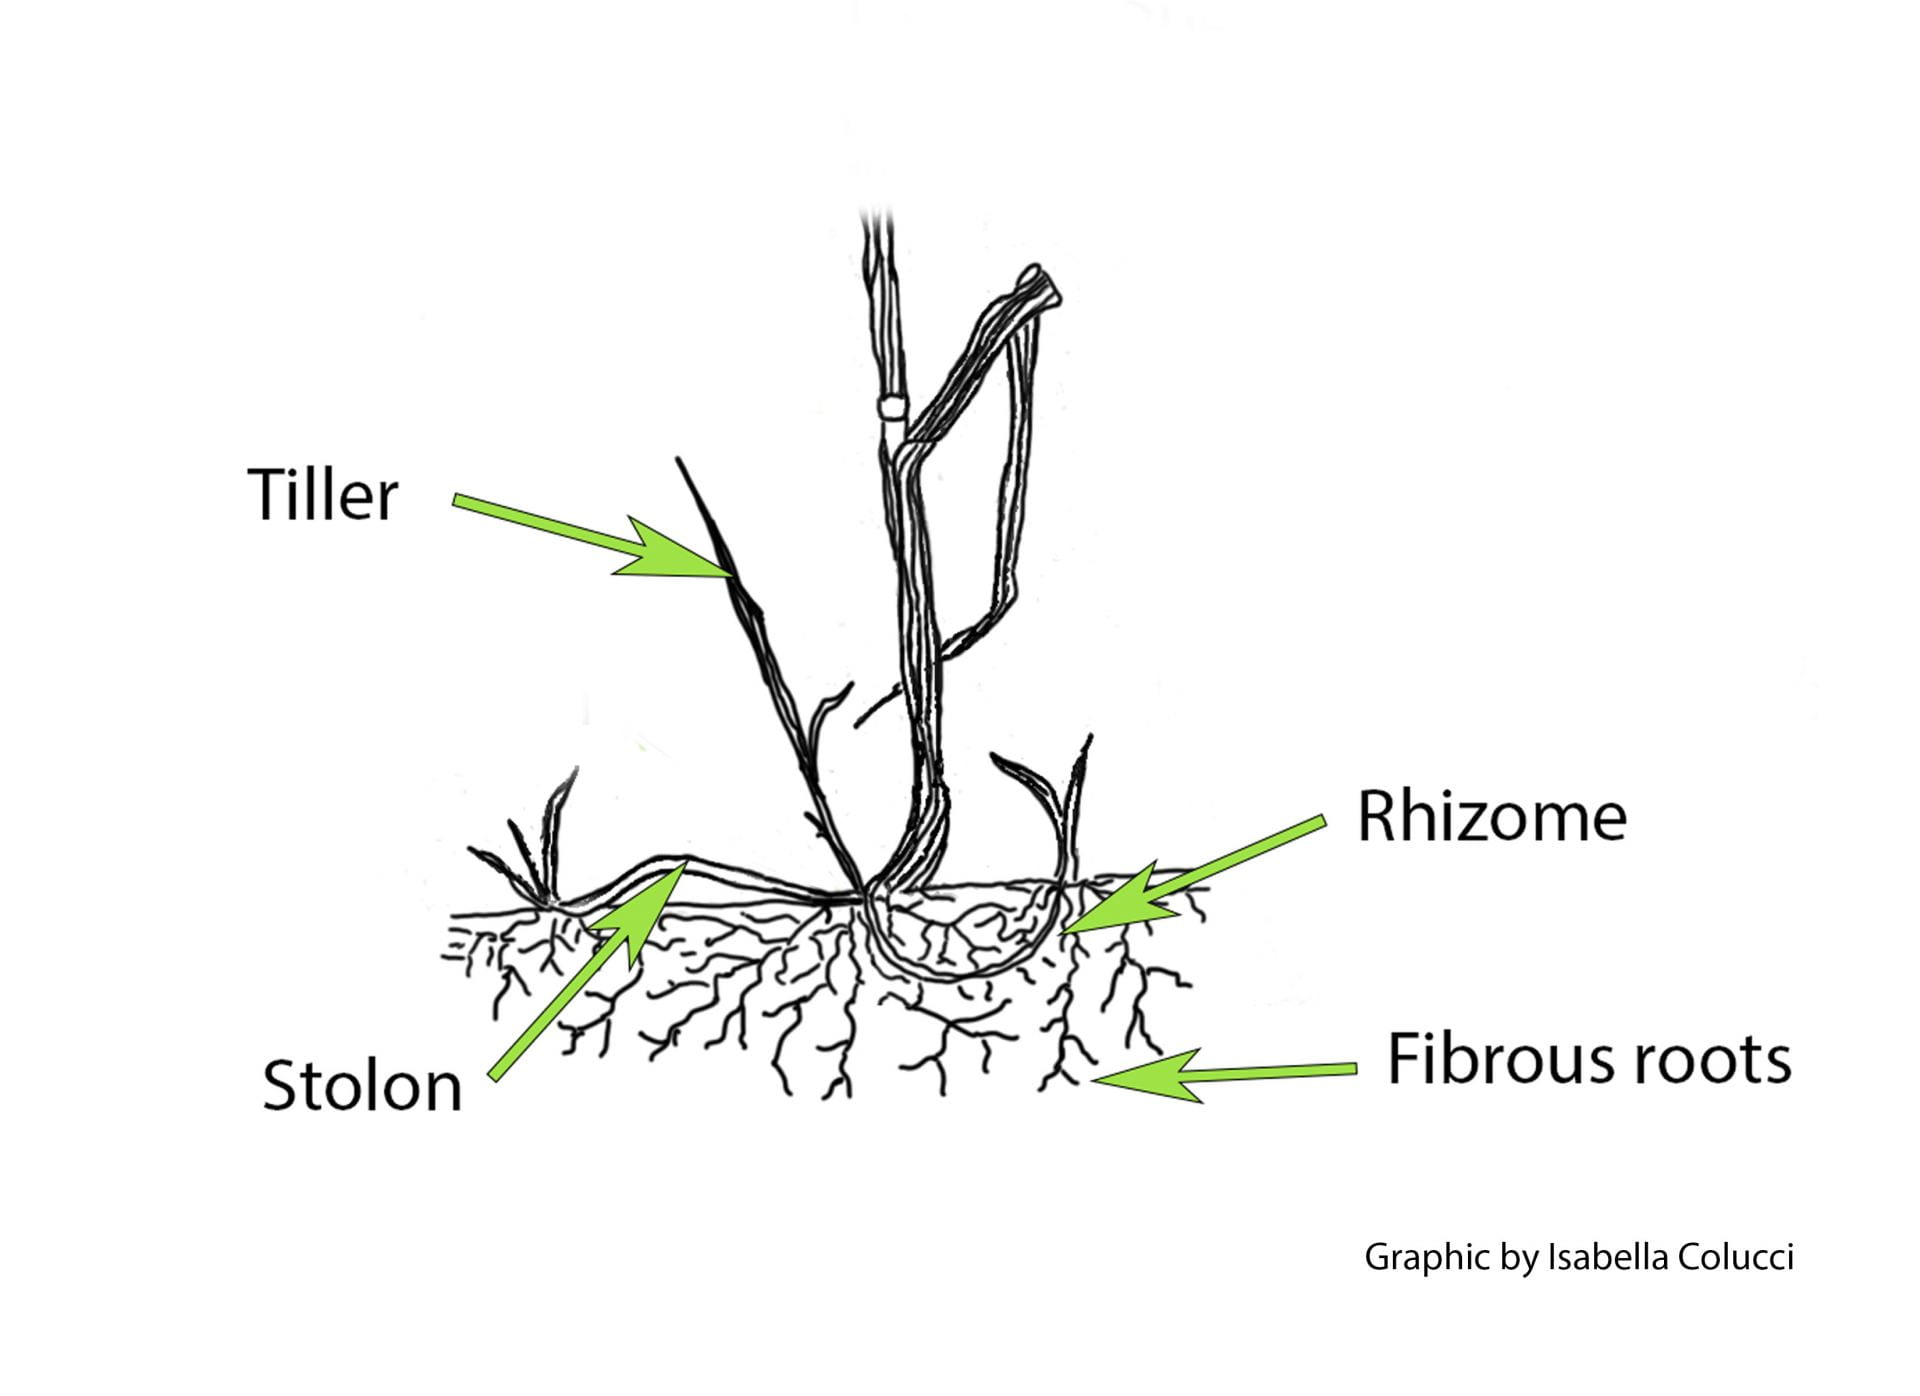 Close up of root system, featuring fibrous root, stolon, rhizome, and tiller.